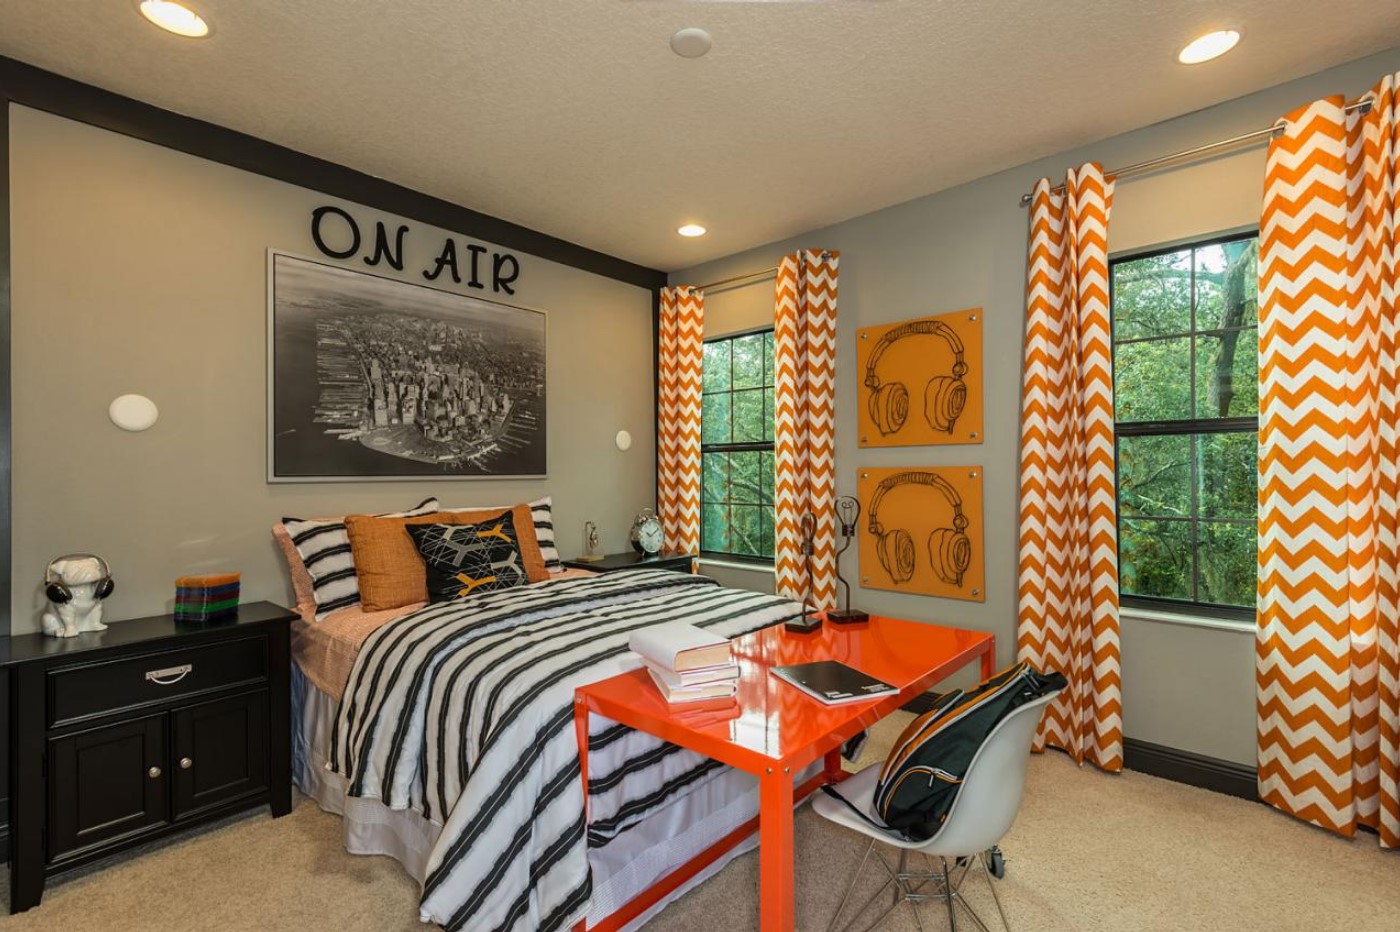 Gray room with orange and musical design